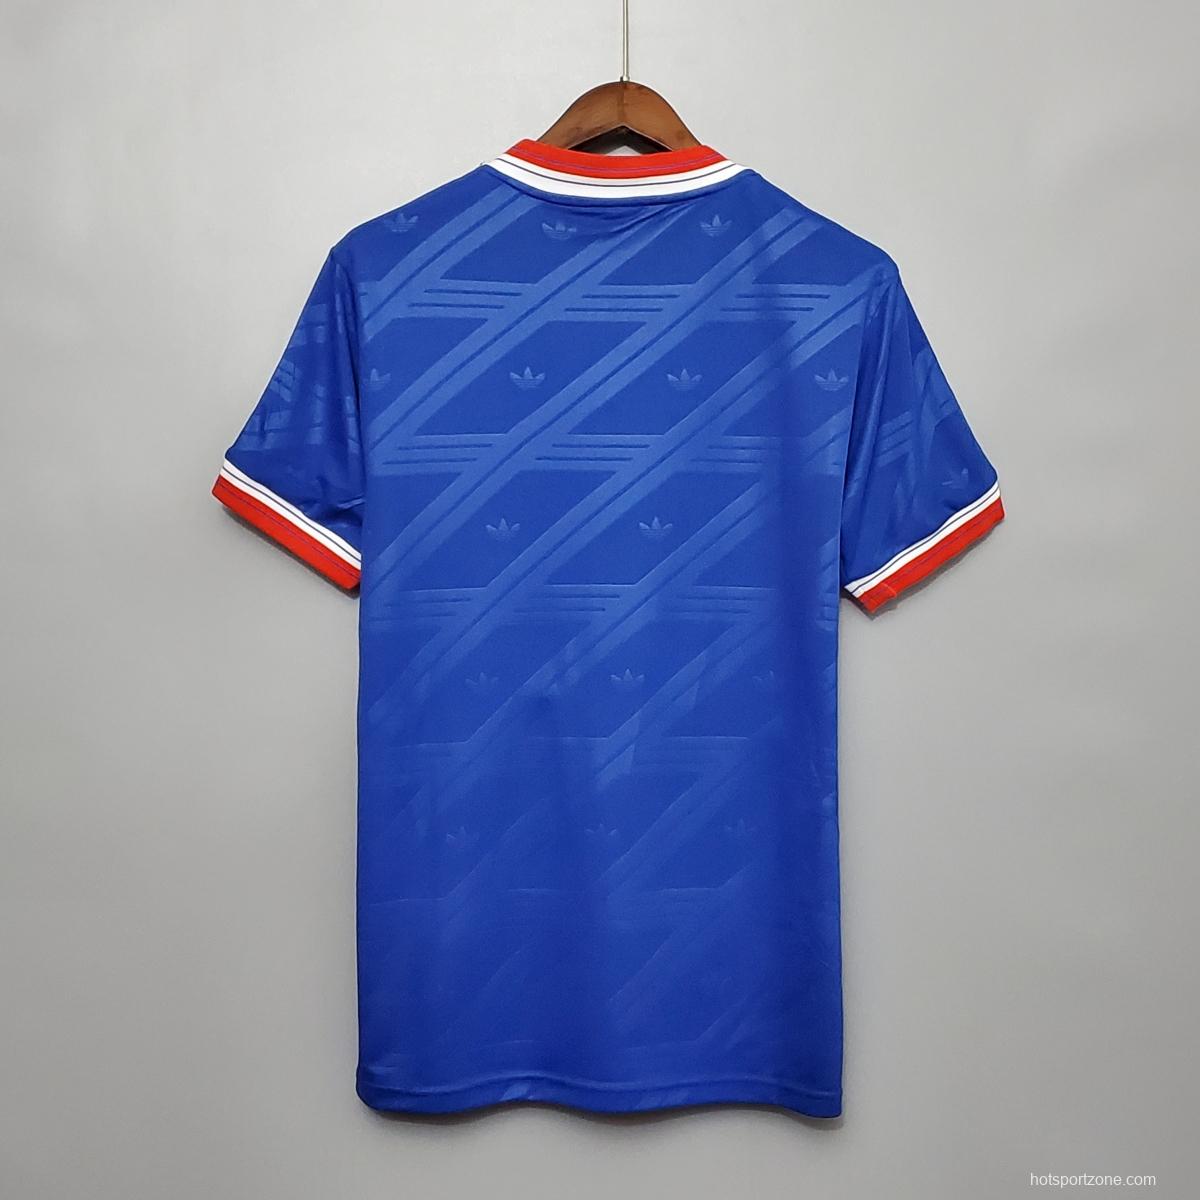 Retro 86/88 Manchester United third away Soccer Jersey